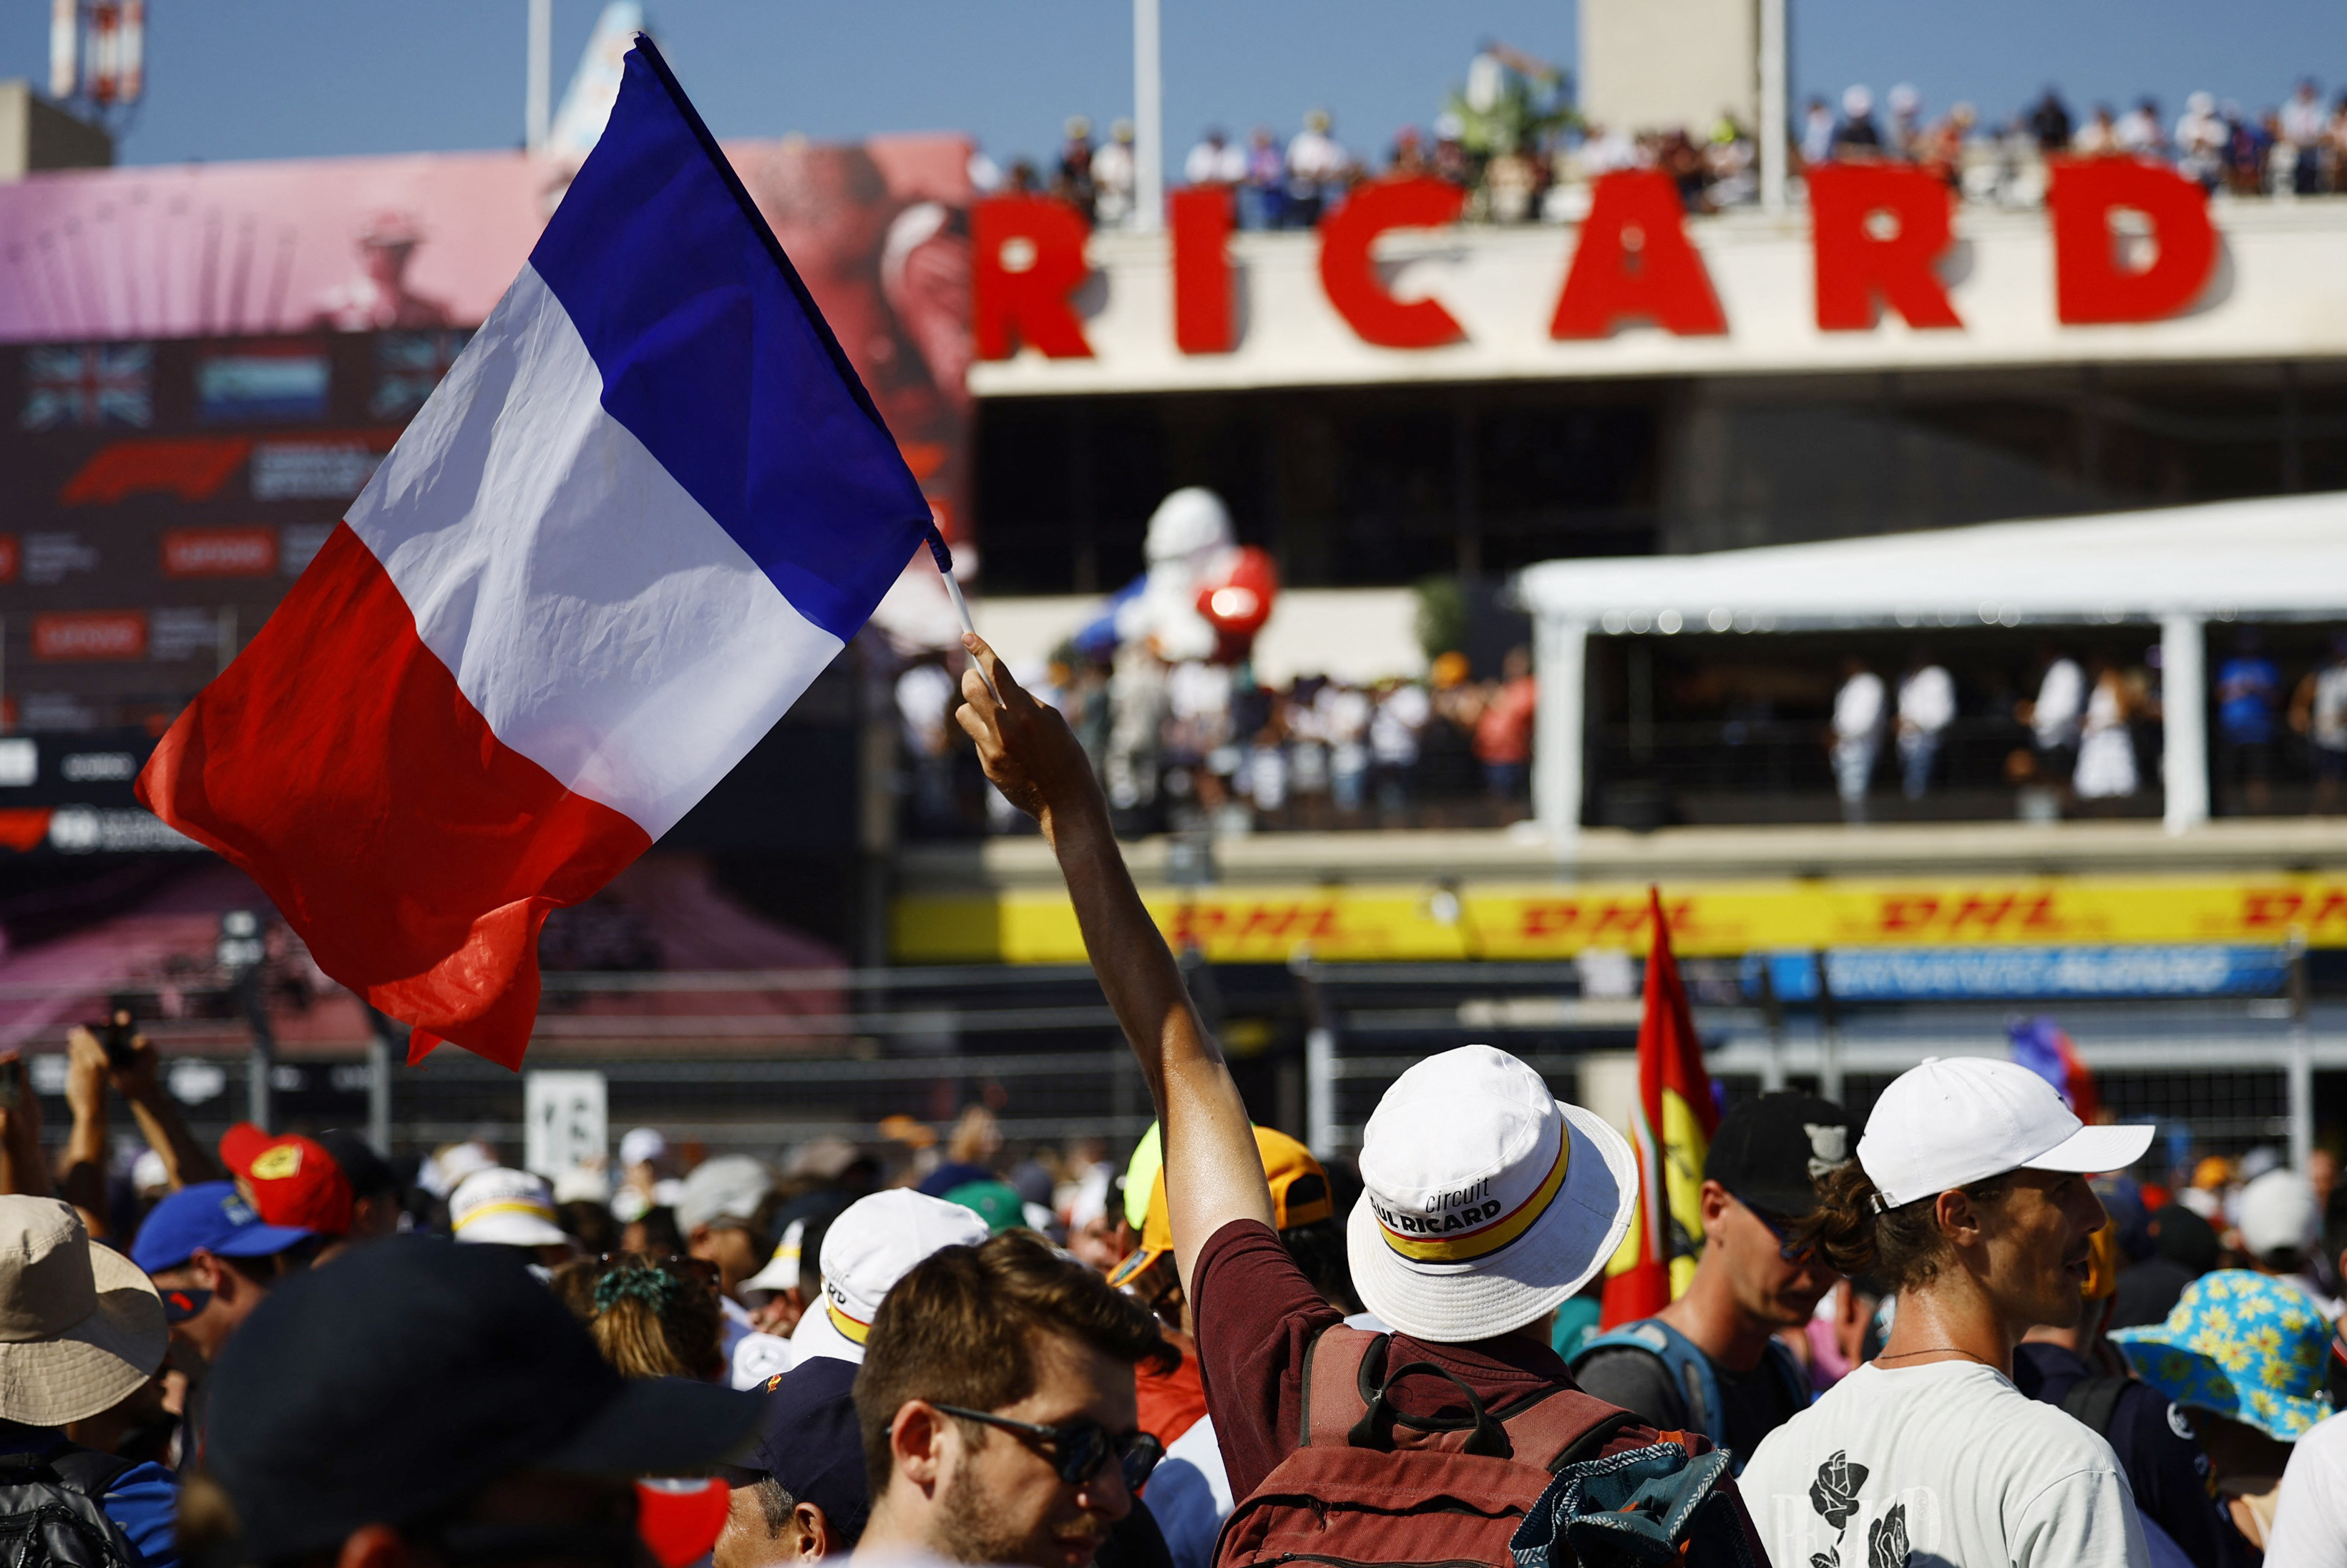 France will not have a Formula 1 Grand Prix in 2023 but could return to the calendar later (Photo: REUTERS)